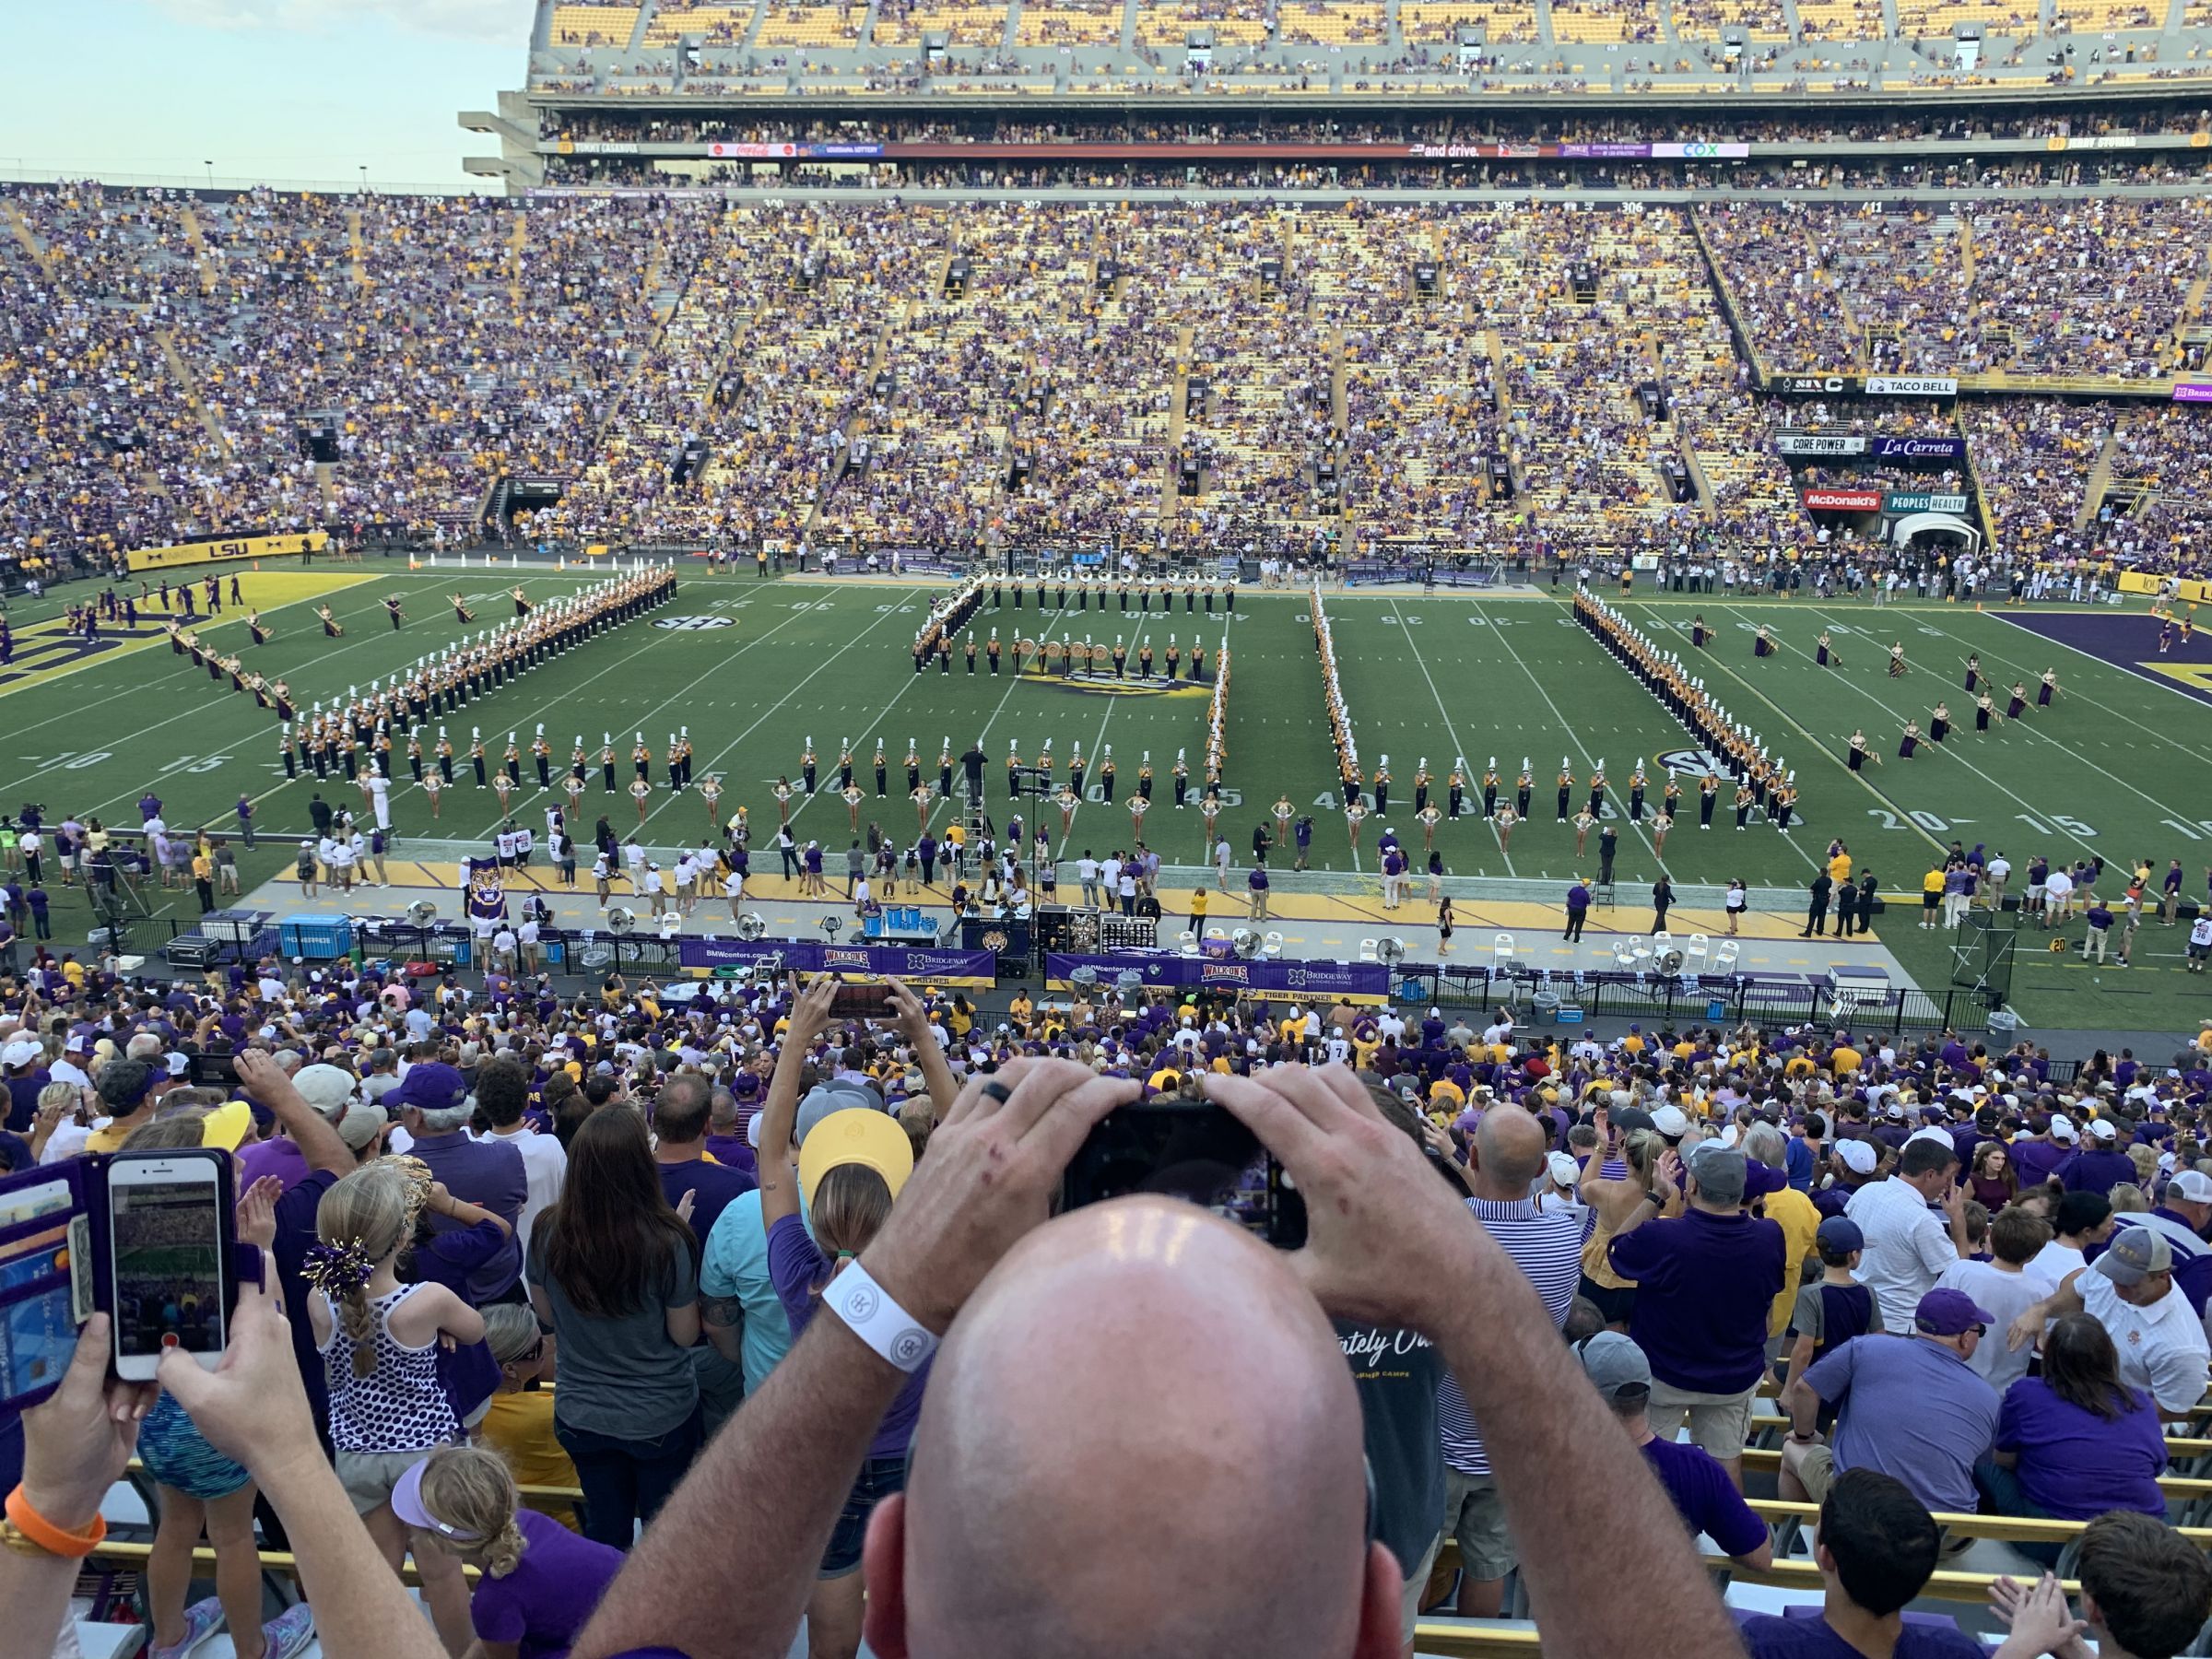 section 103, row 46 seat view  - tiger stadium